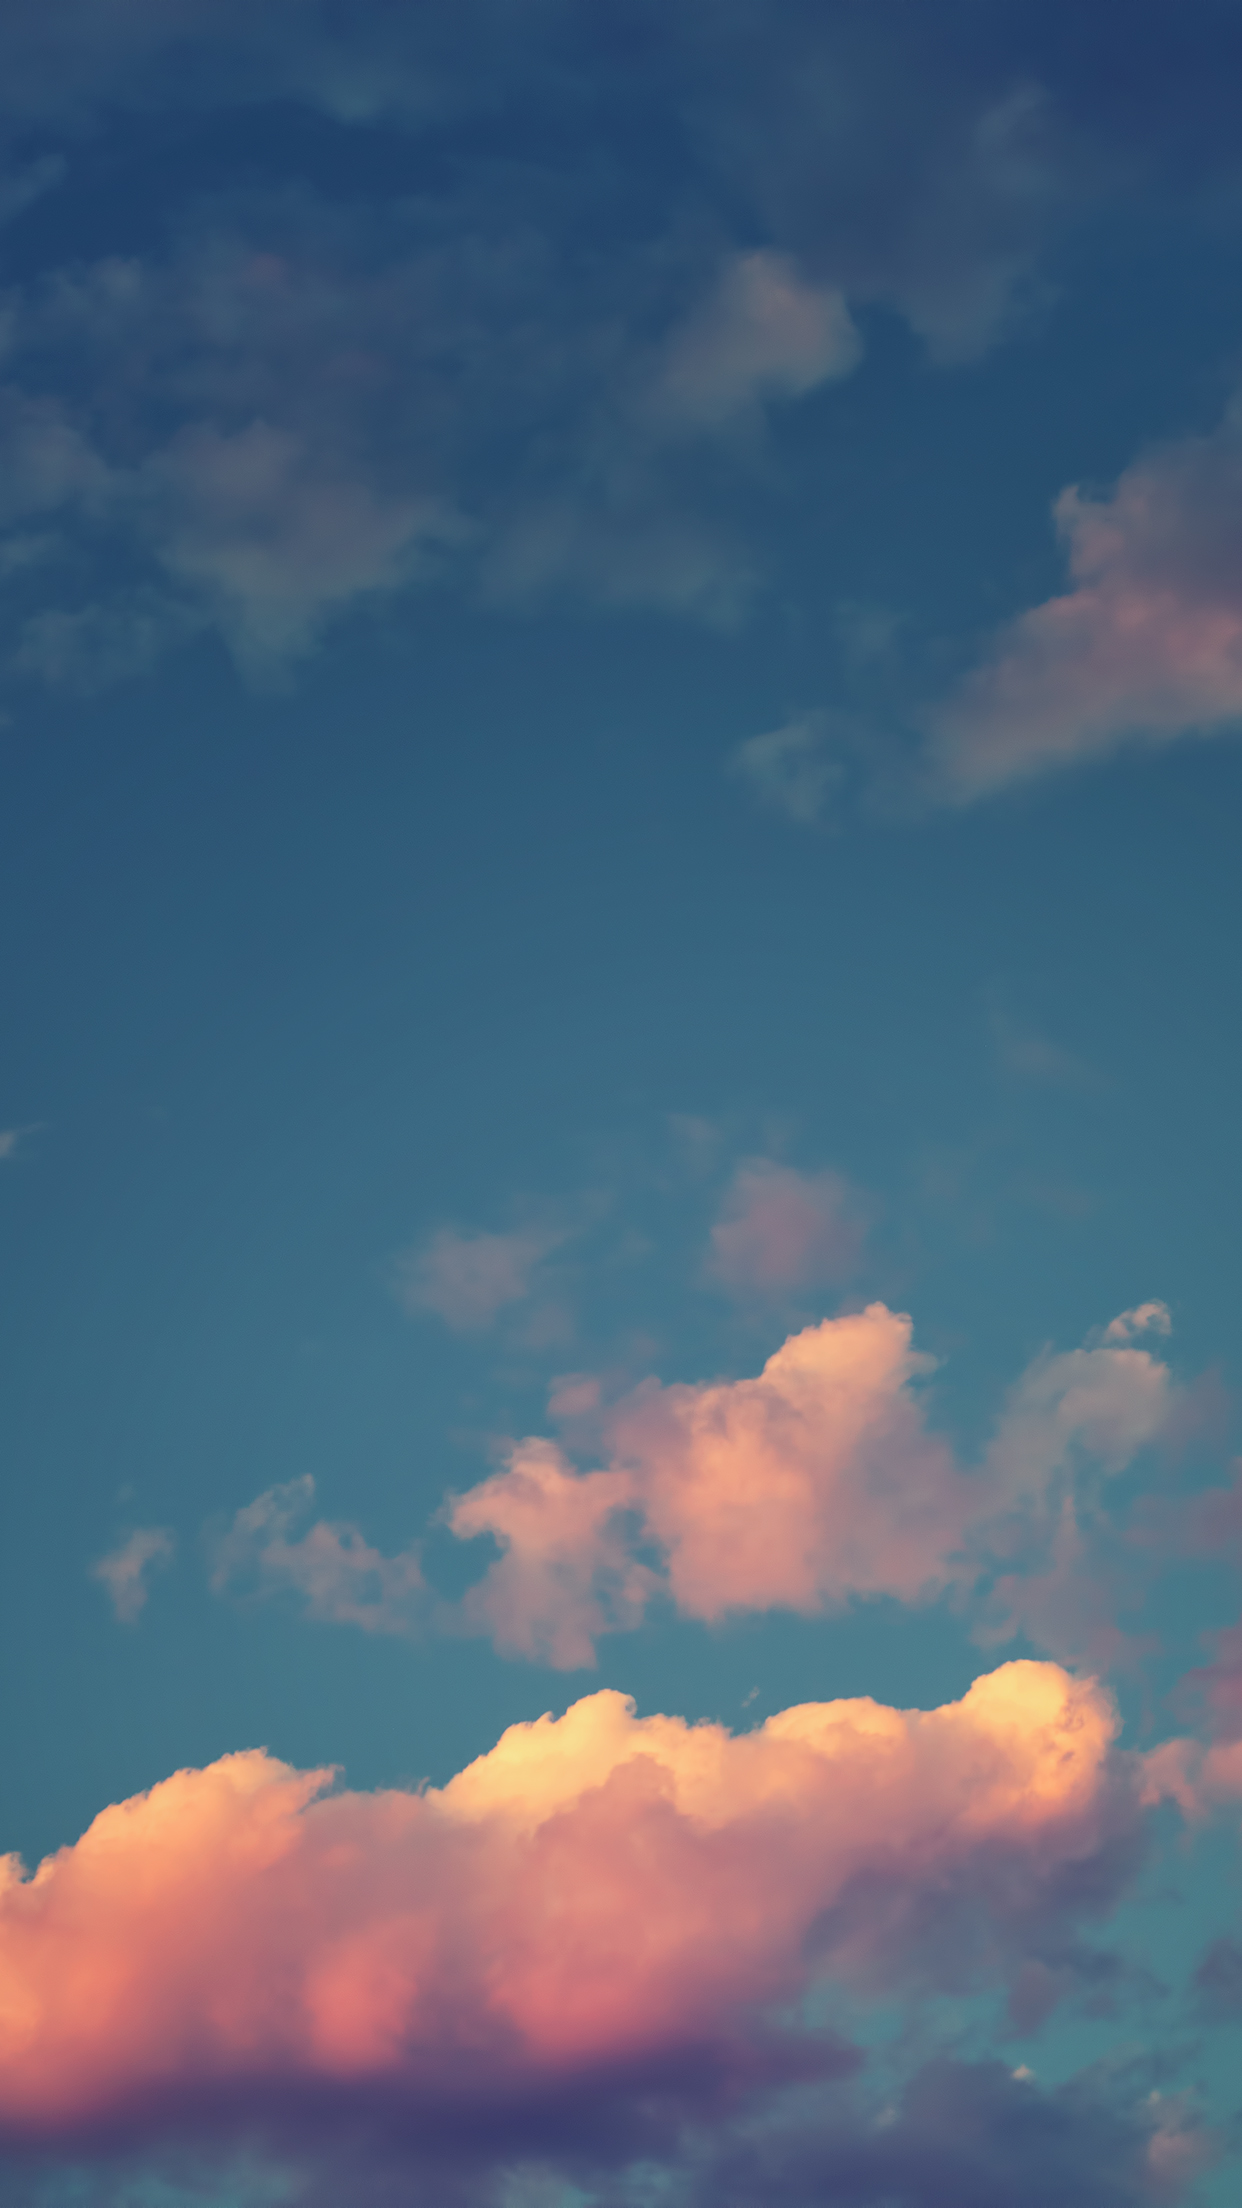 Sunset and clouds wallpapers for iPhone 6 and iPhone 6 Plus